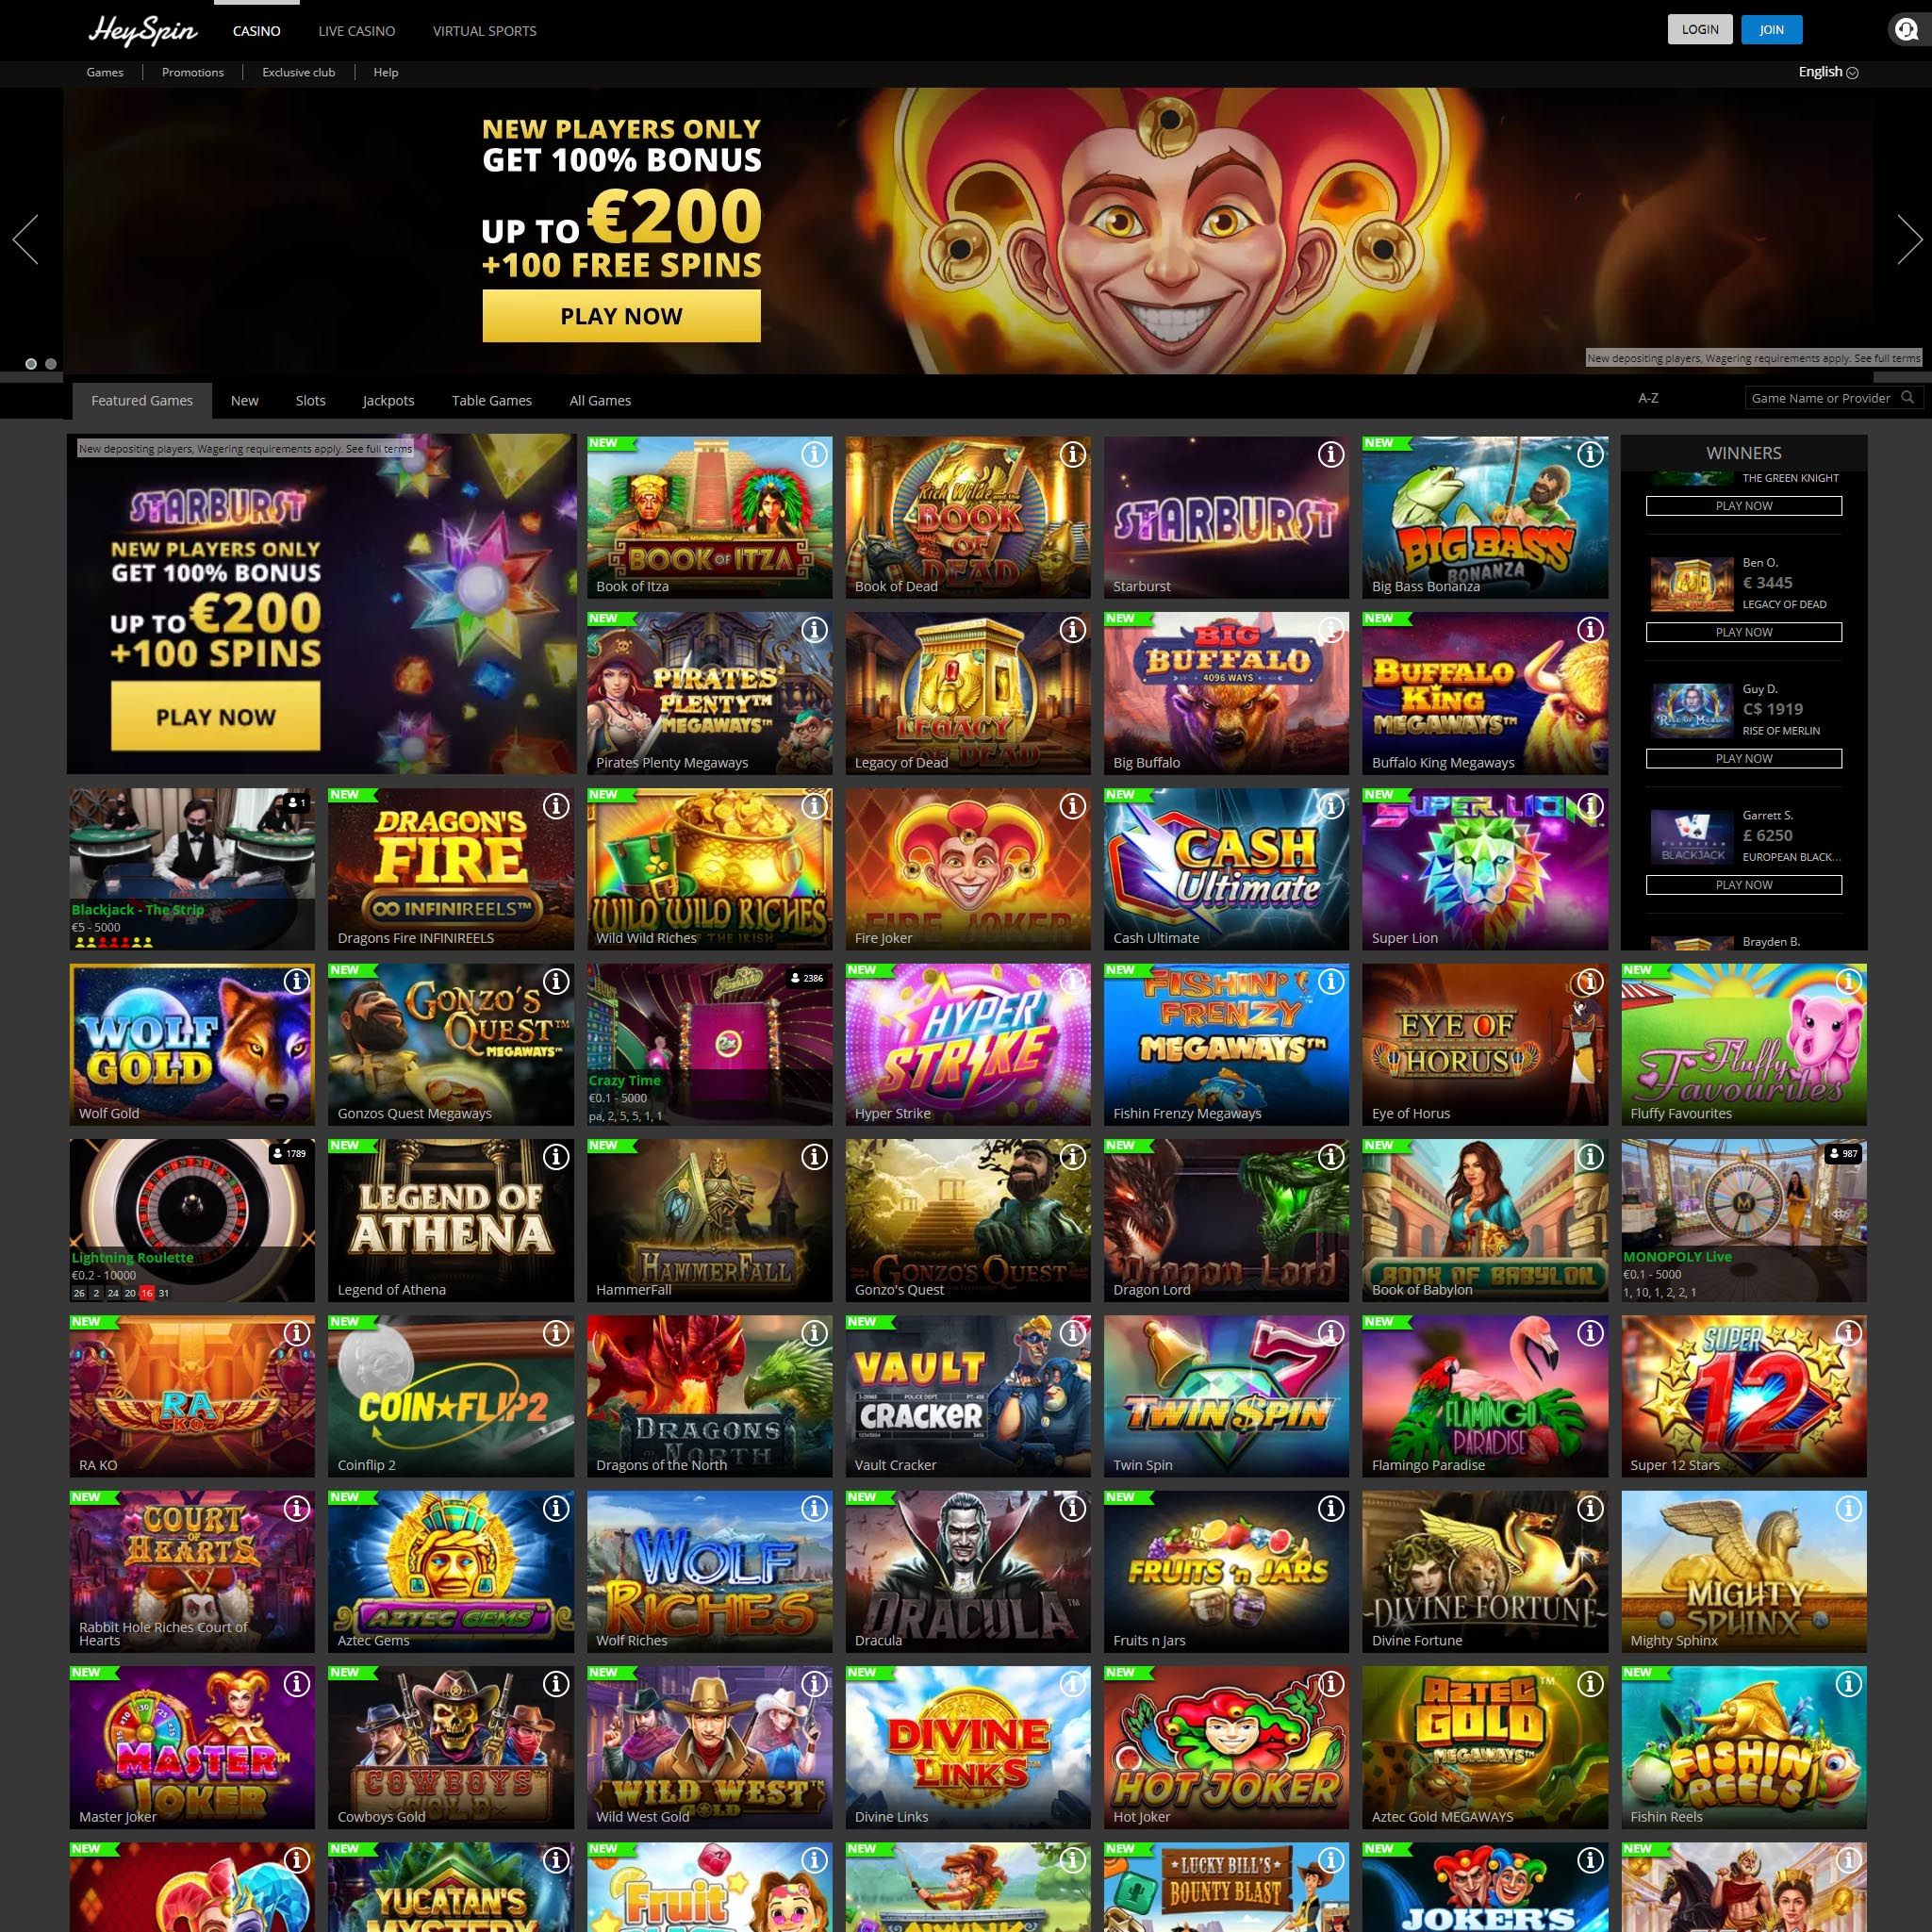 Hey Spin Casino review